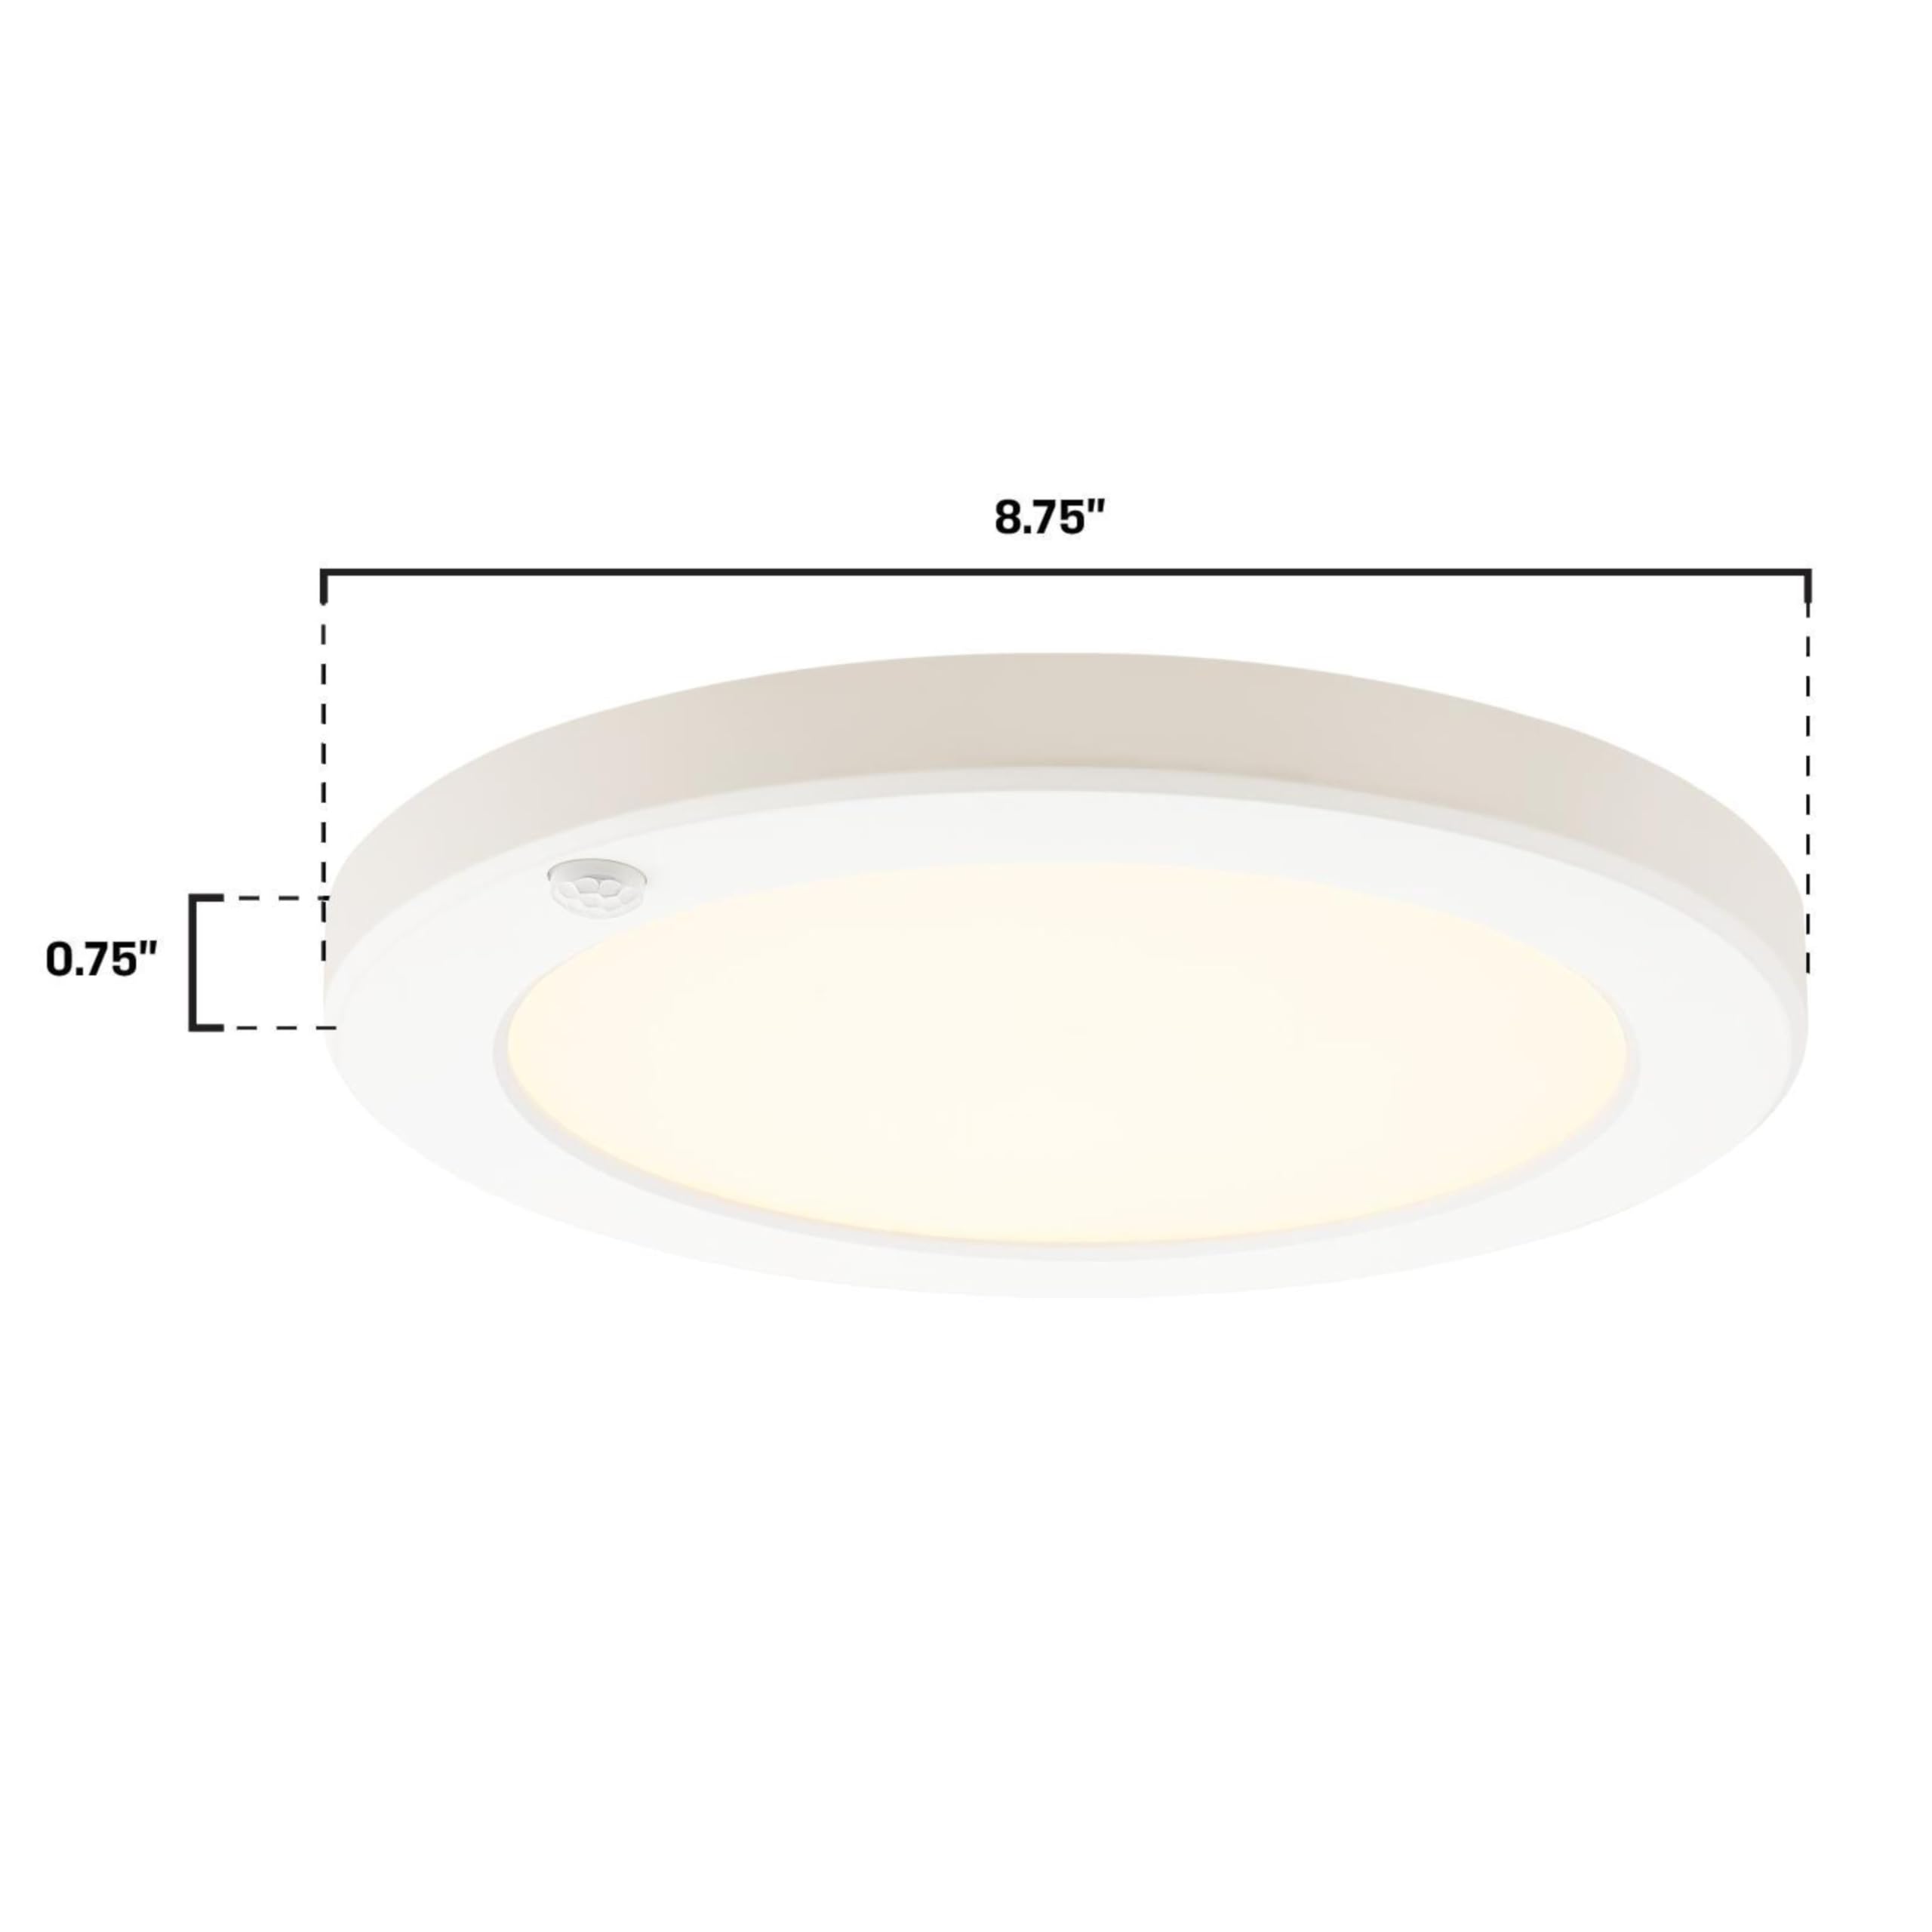 Westinghouse Lighting 6133200 8 Inch 18 Watt LED Indoor Flush Mount Fixture with Motion Sensor and Color Temperature Selection, 3000K, 4000K, 5000K, White Finish with White Acrylic Shade